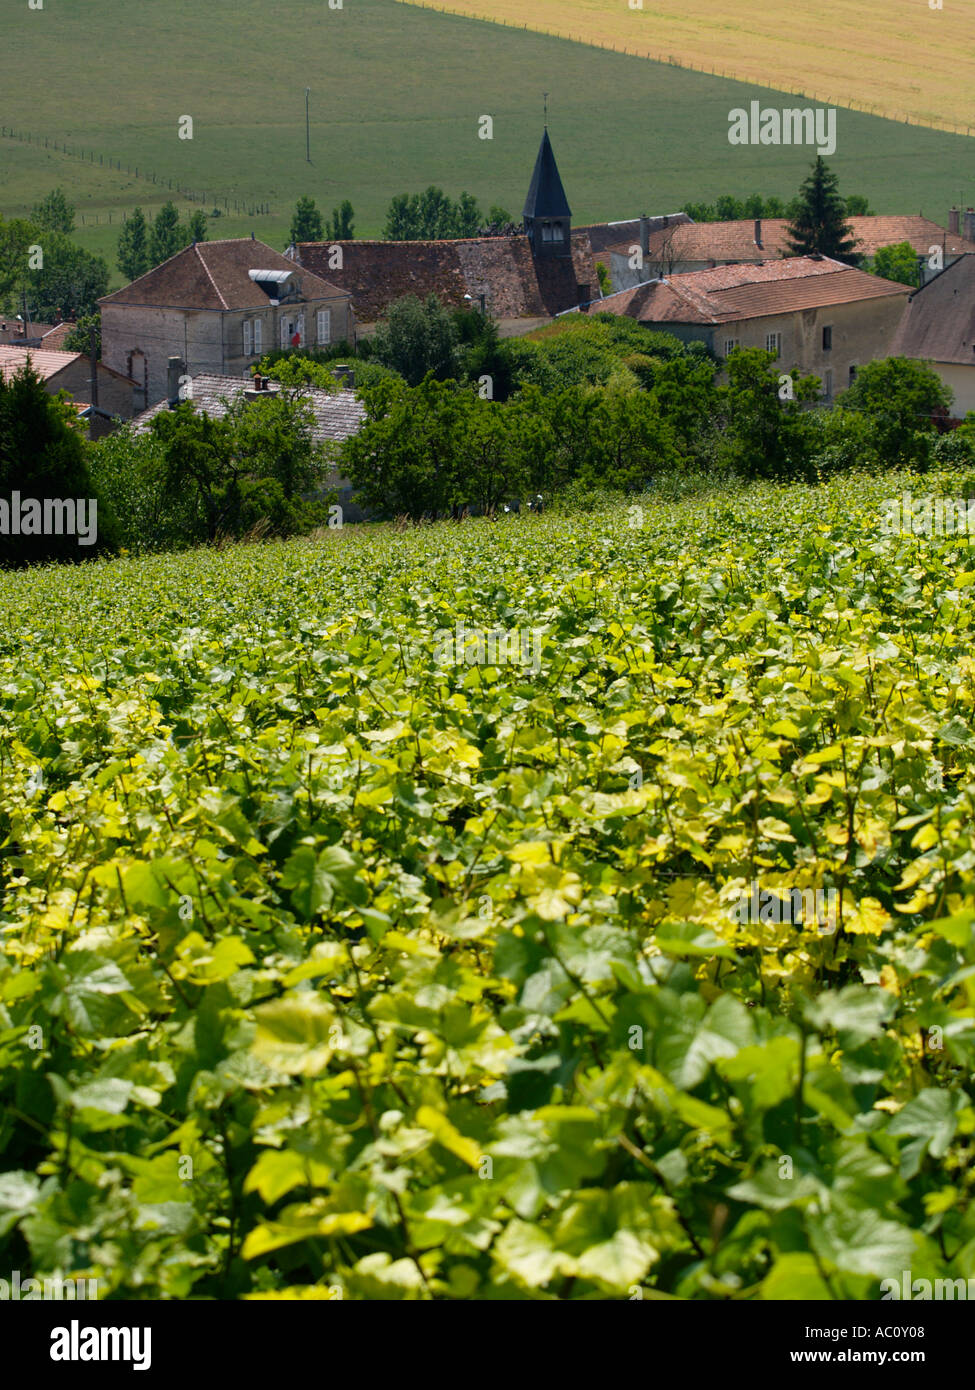 Small village near Bar sur Aube in the Champagne region of France with hills with vineyards grapevines in the foreground Stock Photo